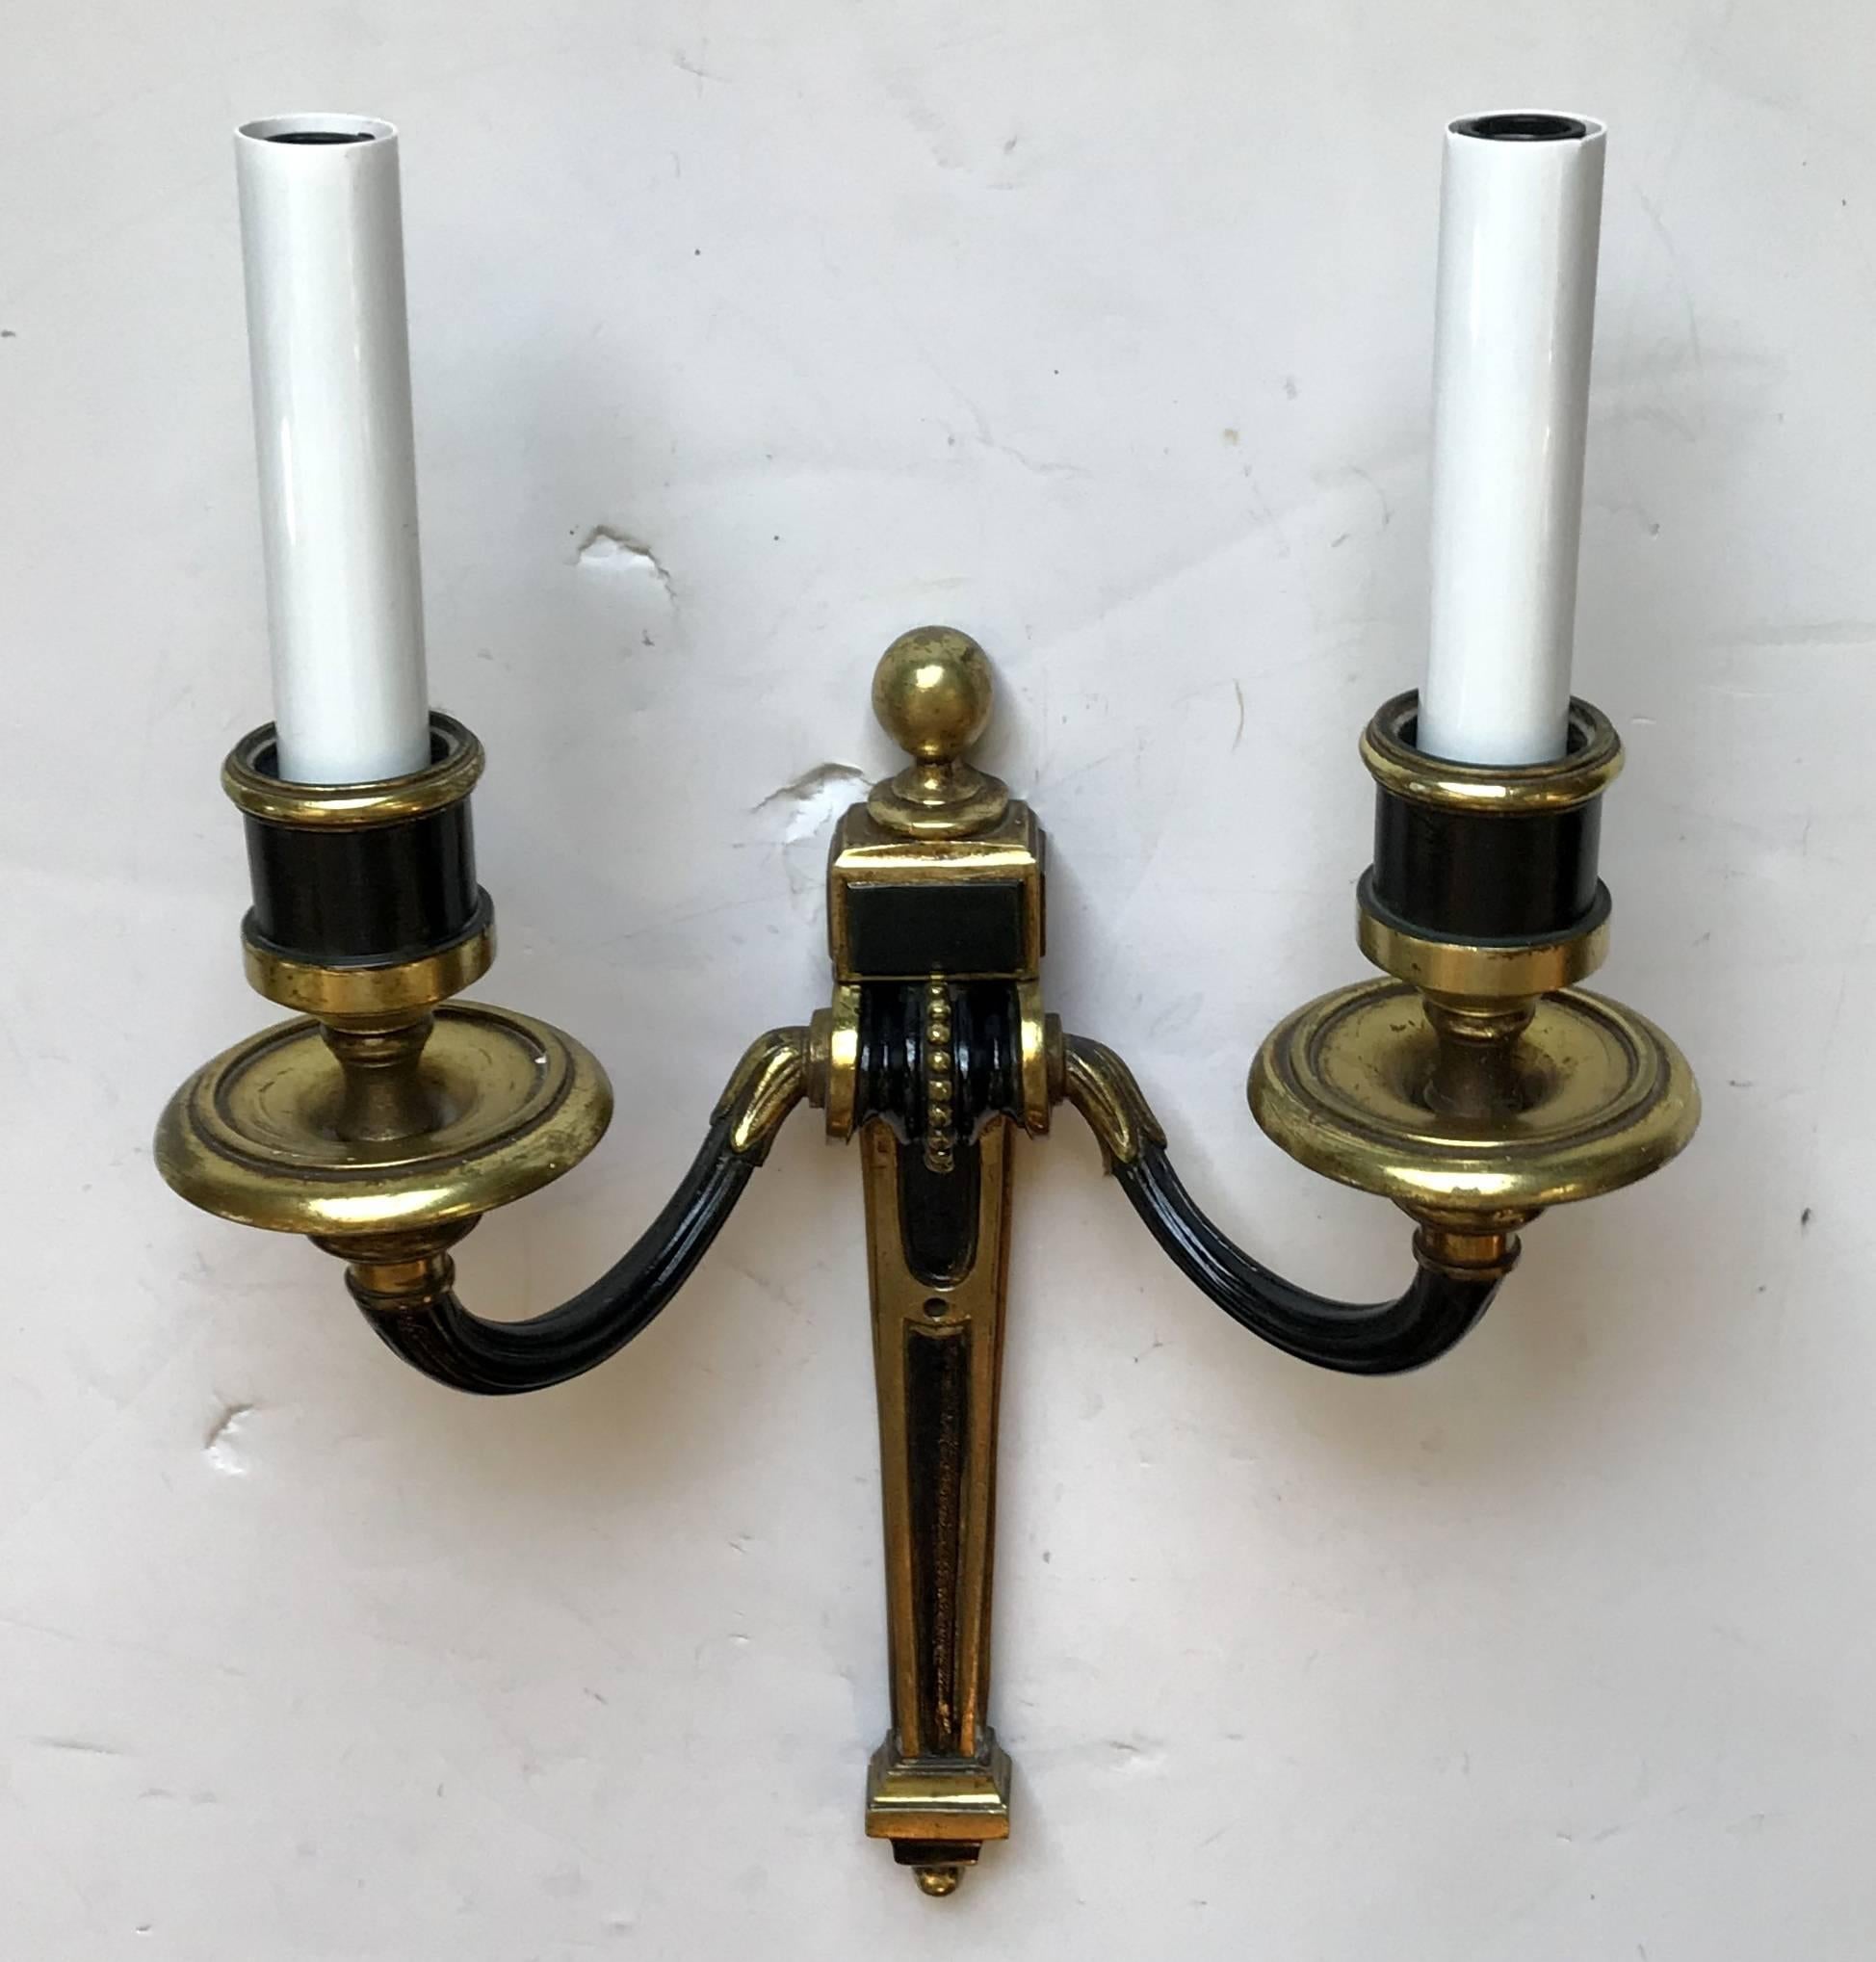 Wonderful Pair of Caldwell Bronze Patinated Regency Neoclassical Empire Sconces For Sale 2